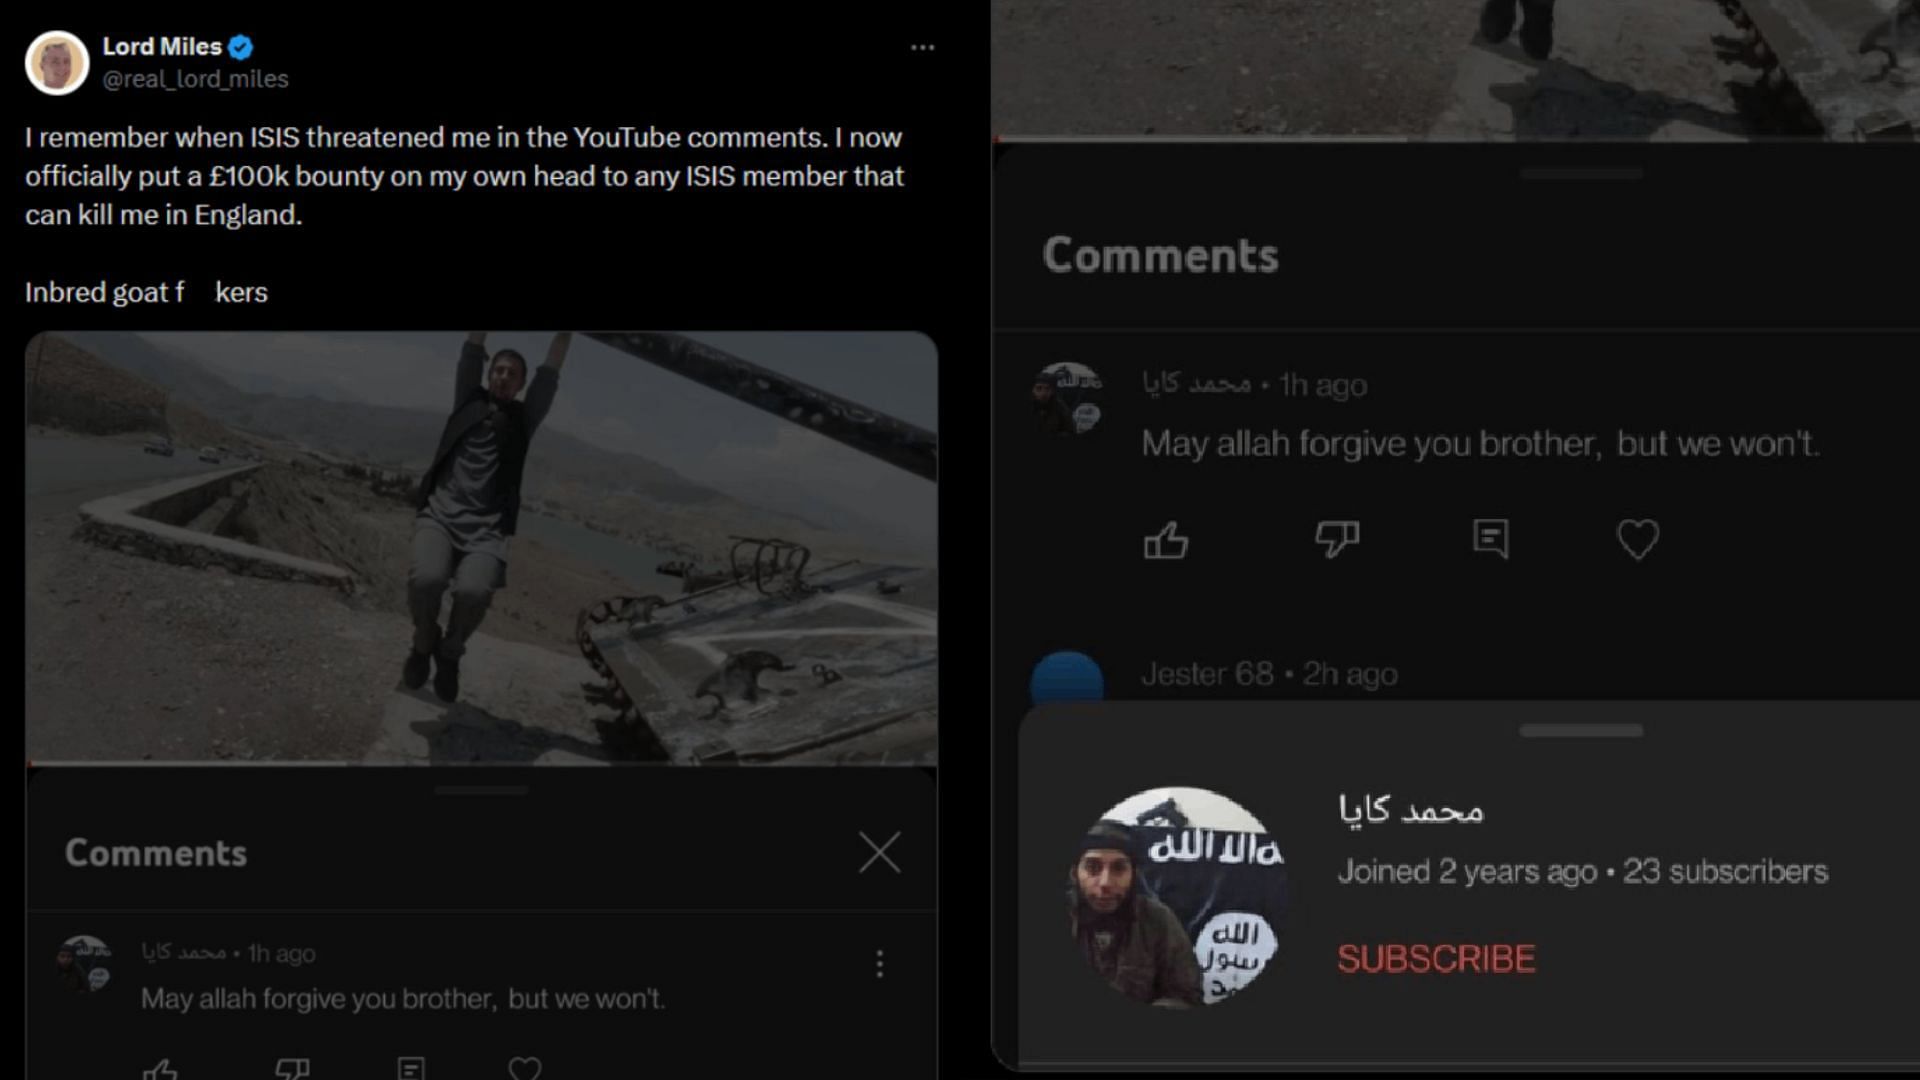 Miles had allegedly been threatened by a member of ISIS on YouTube (Image via real_lord_miles/X)